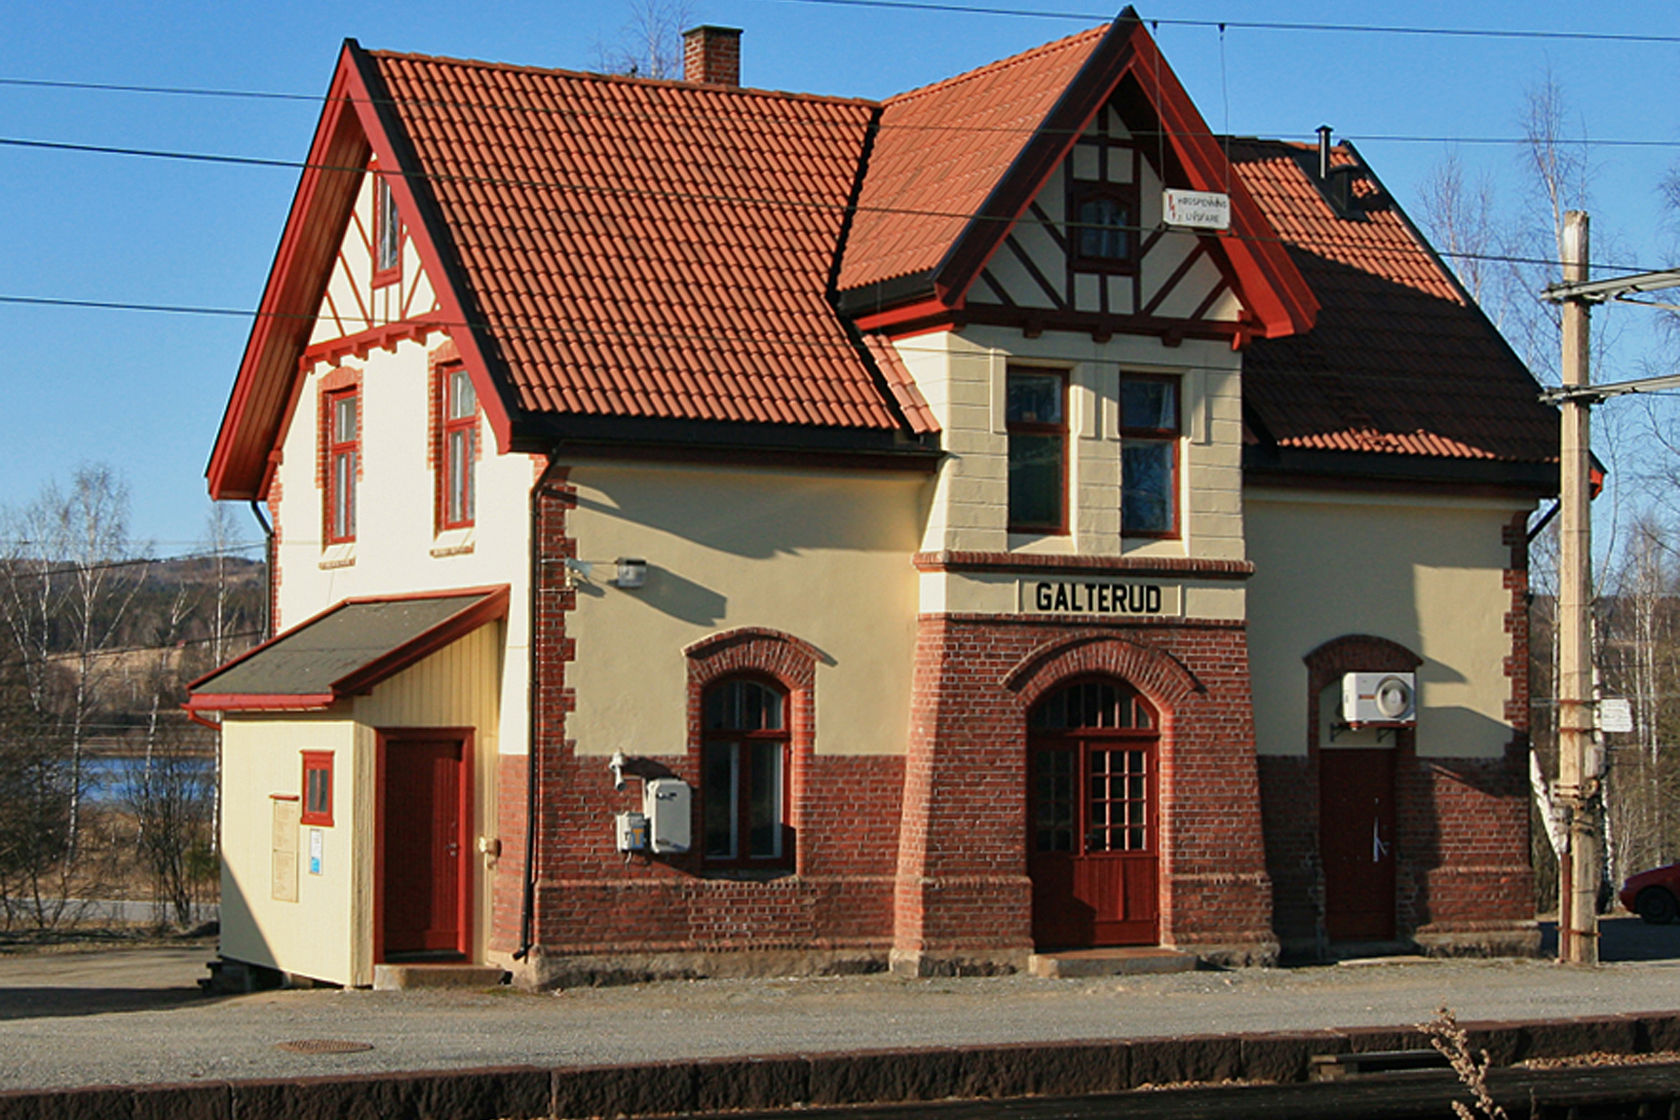 The station building at Galterud station